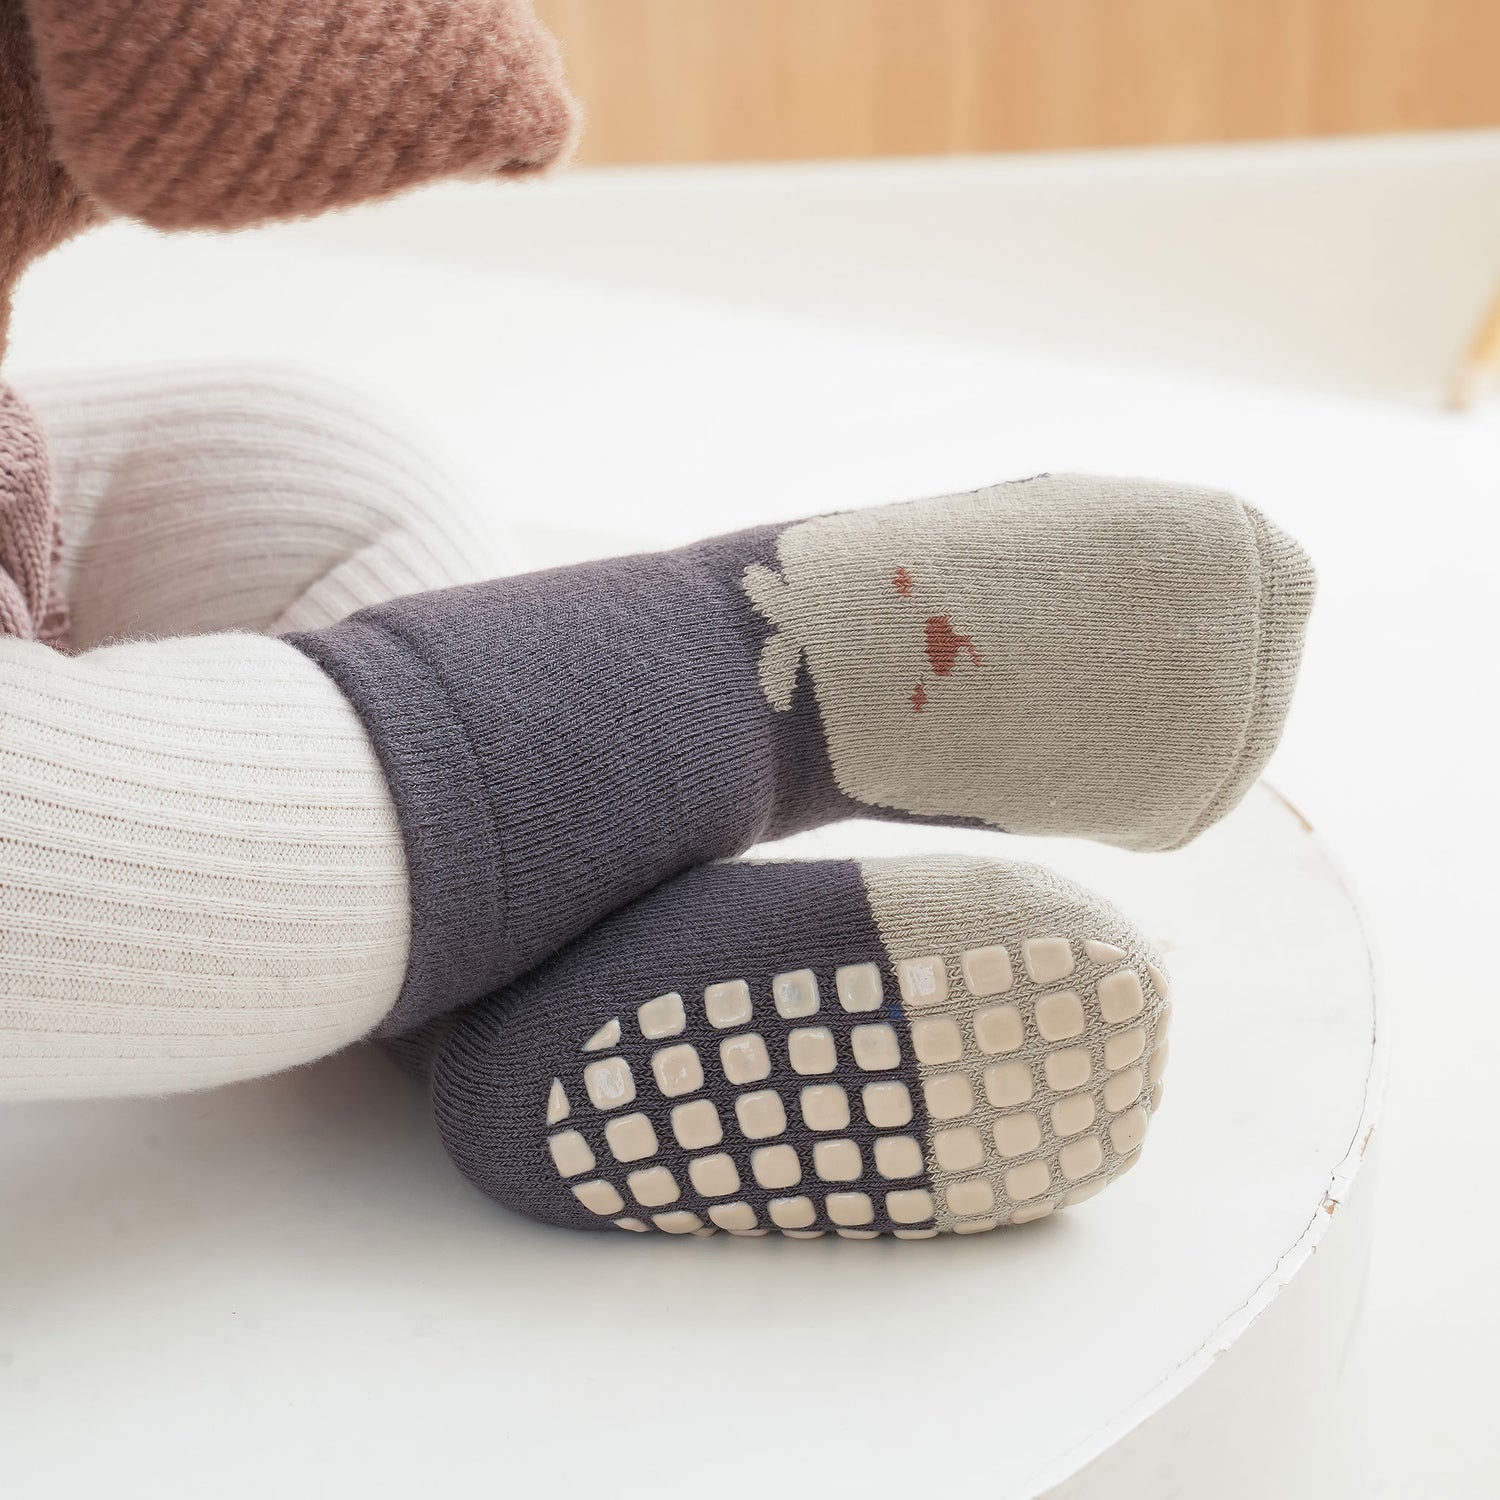 Snug, comfortable ankle socks with grips for small feet.